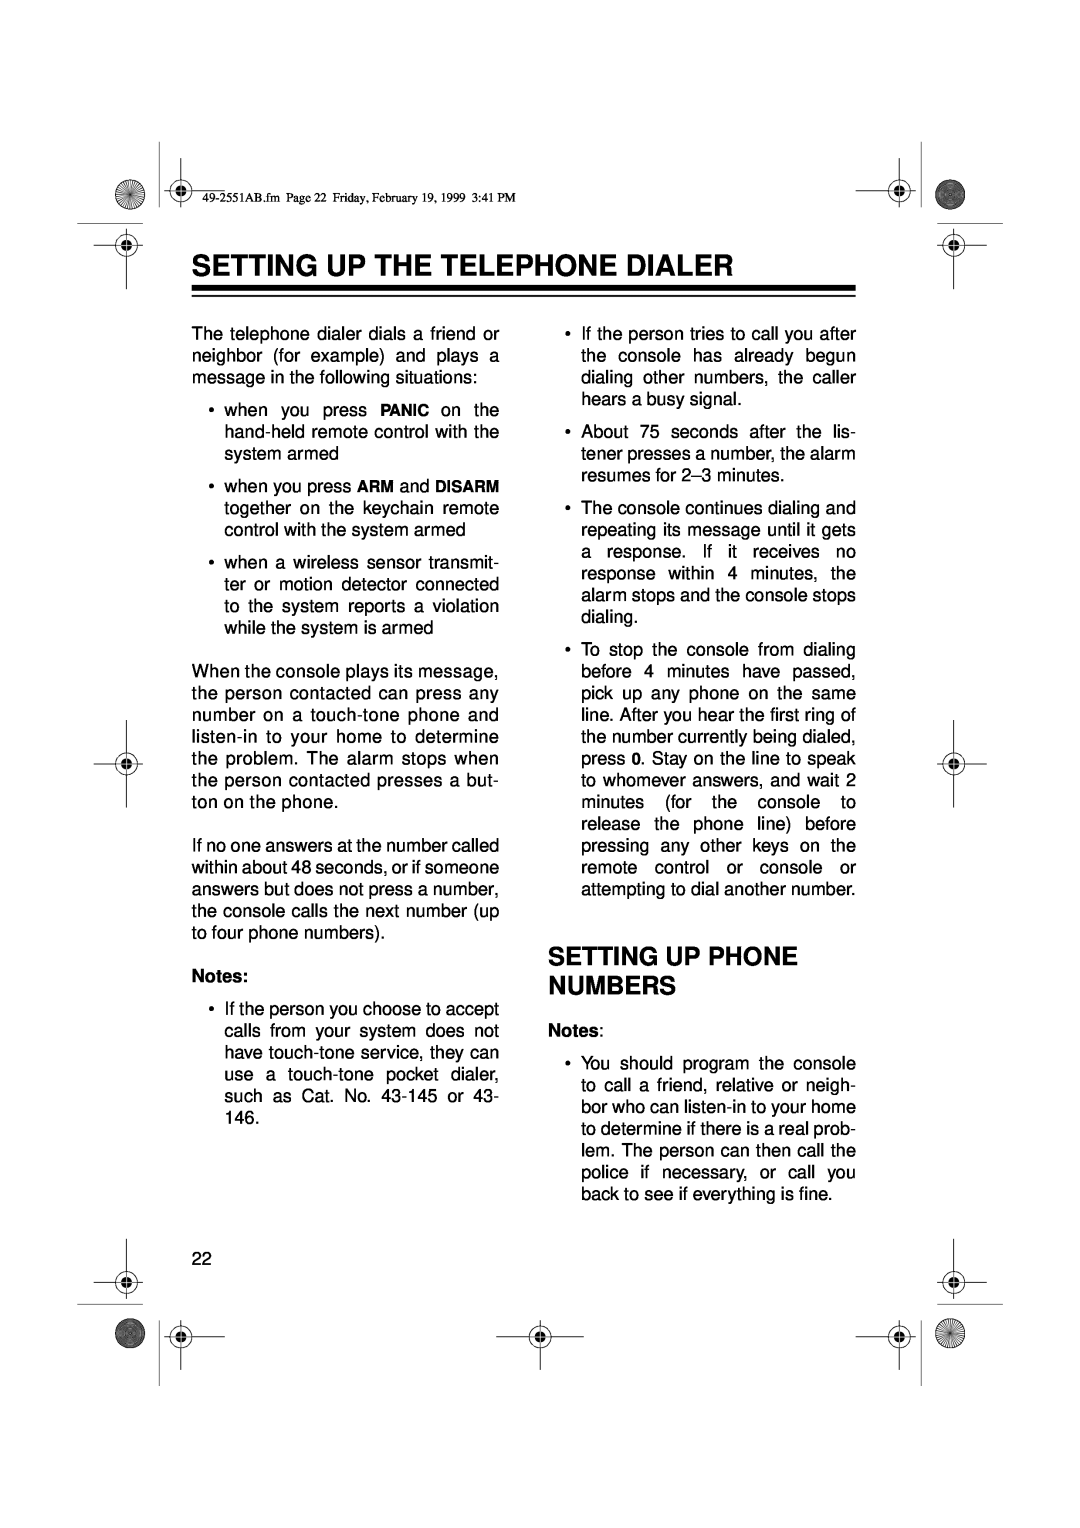 Radio Shack 49-2551A owner manual Setting Up The Telephone Dialer, Setting Up Phone Numbers 